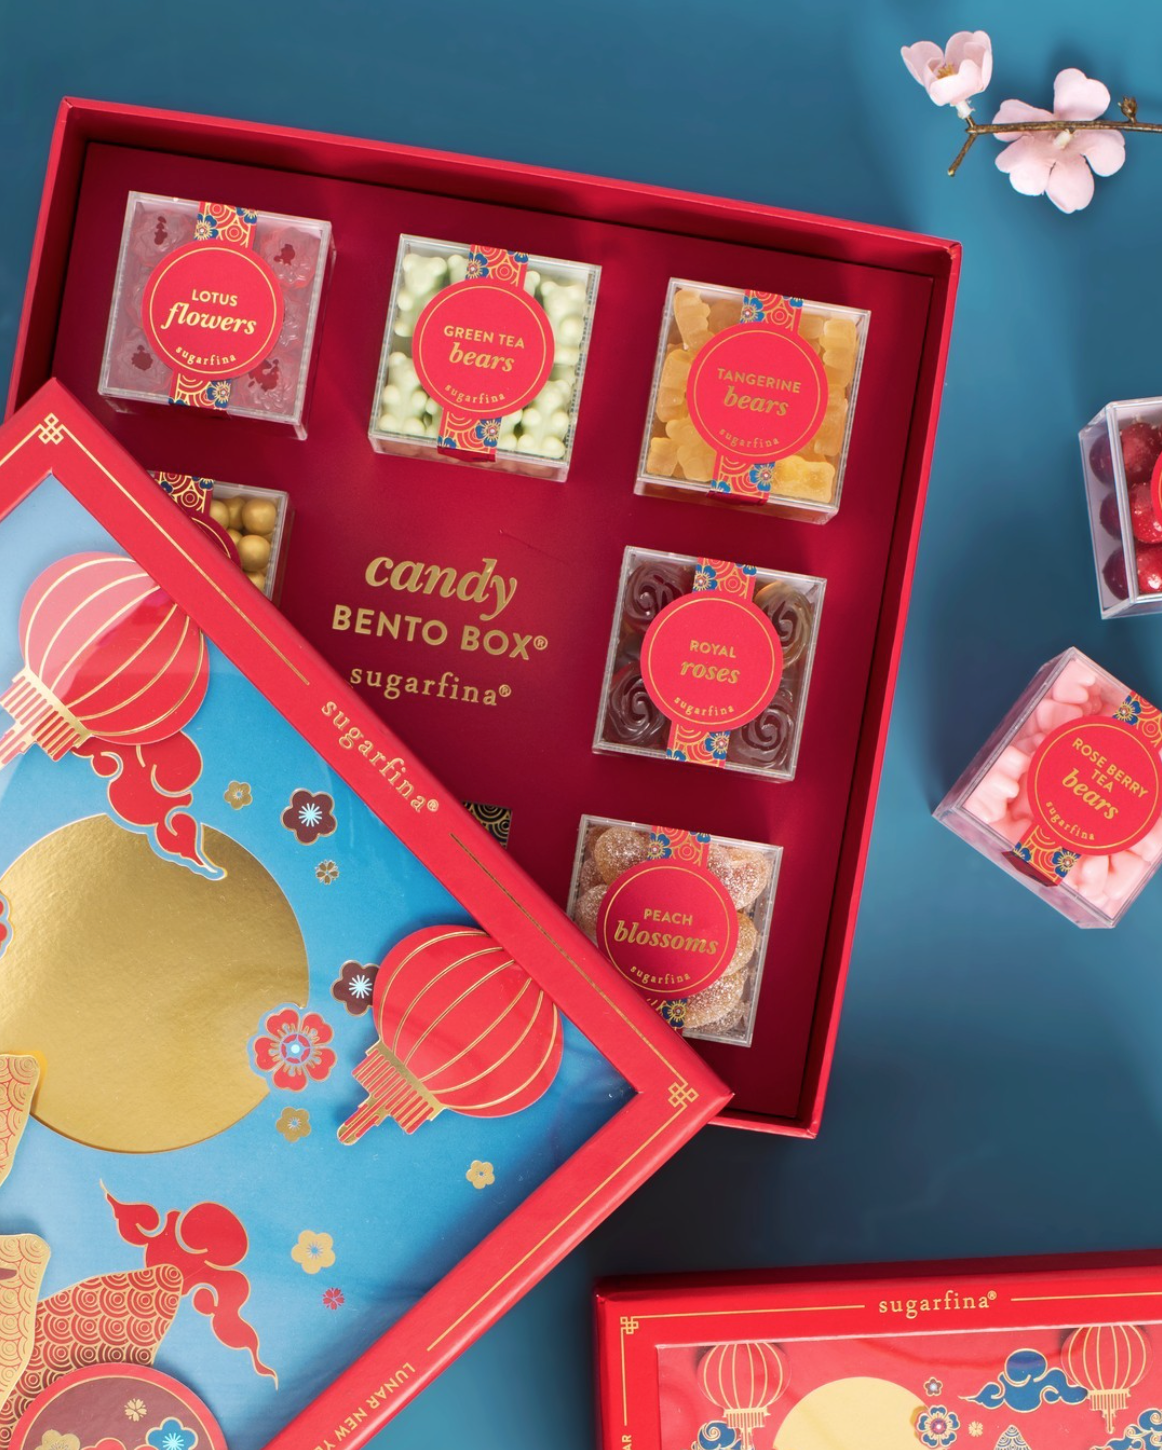 Celebrate The Lunar New Year With These Unique GiftsCelebrate The Lunar New Year With These Unique Gifts